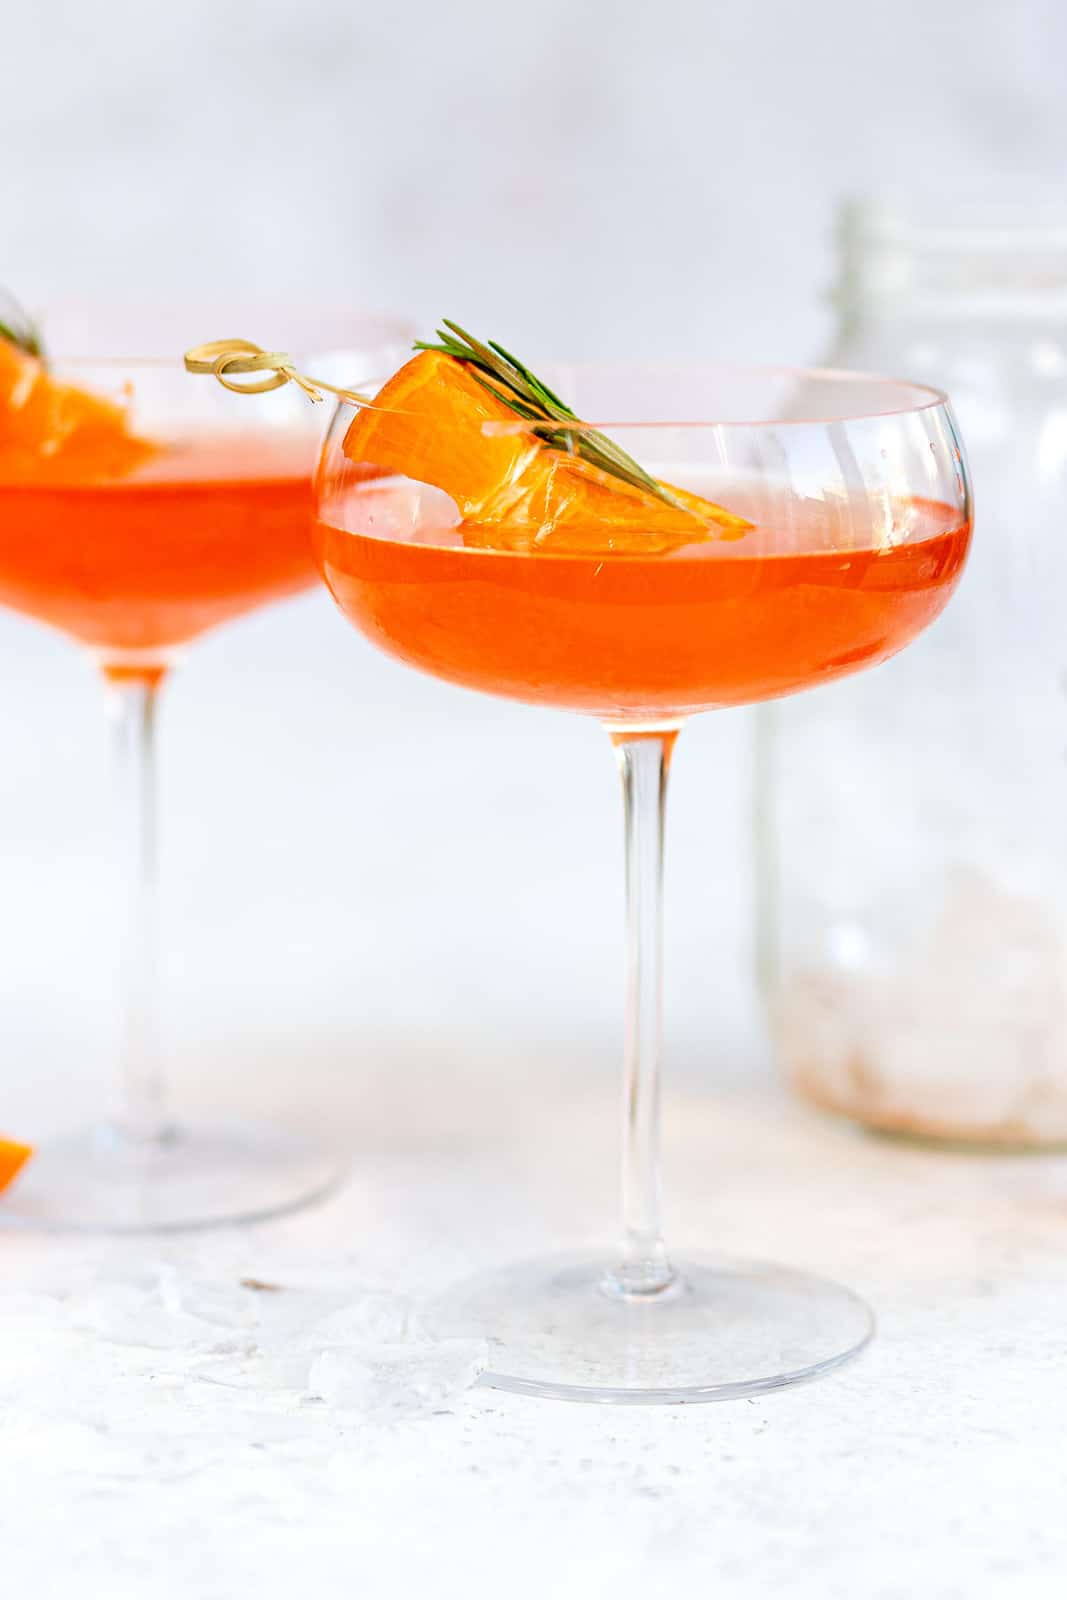 2 aperol and tequilla martinis with fruit garnishes